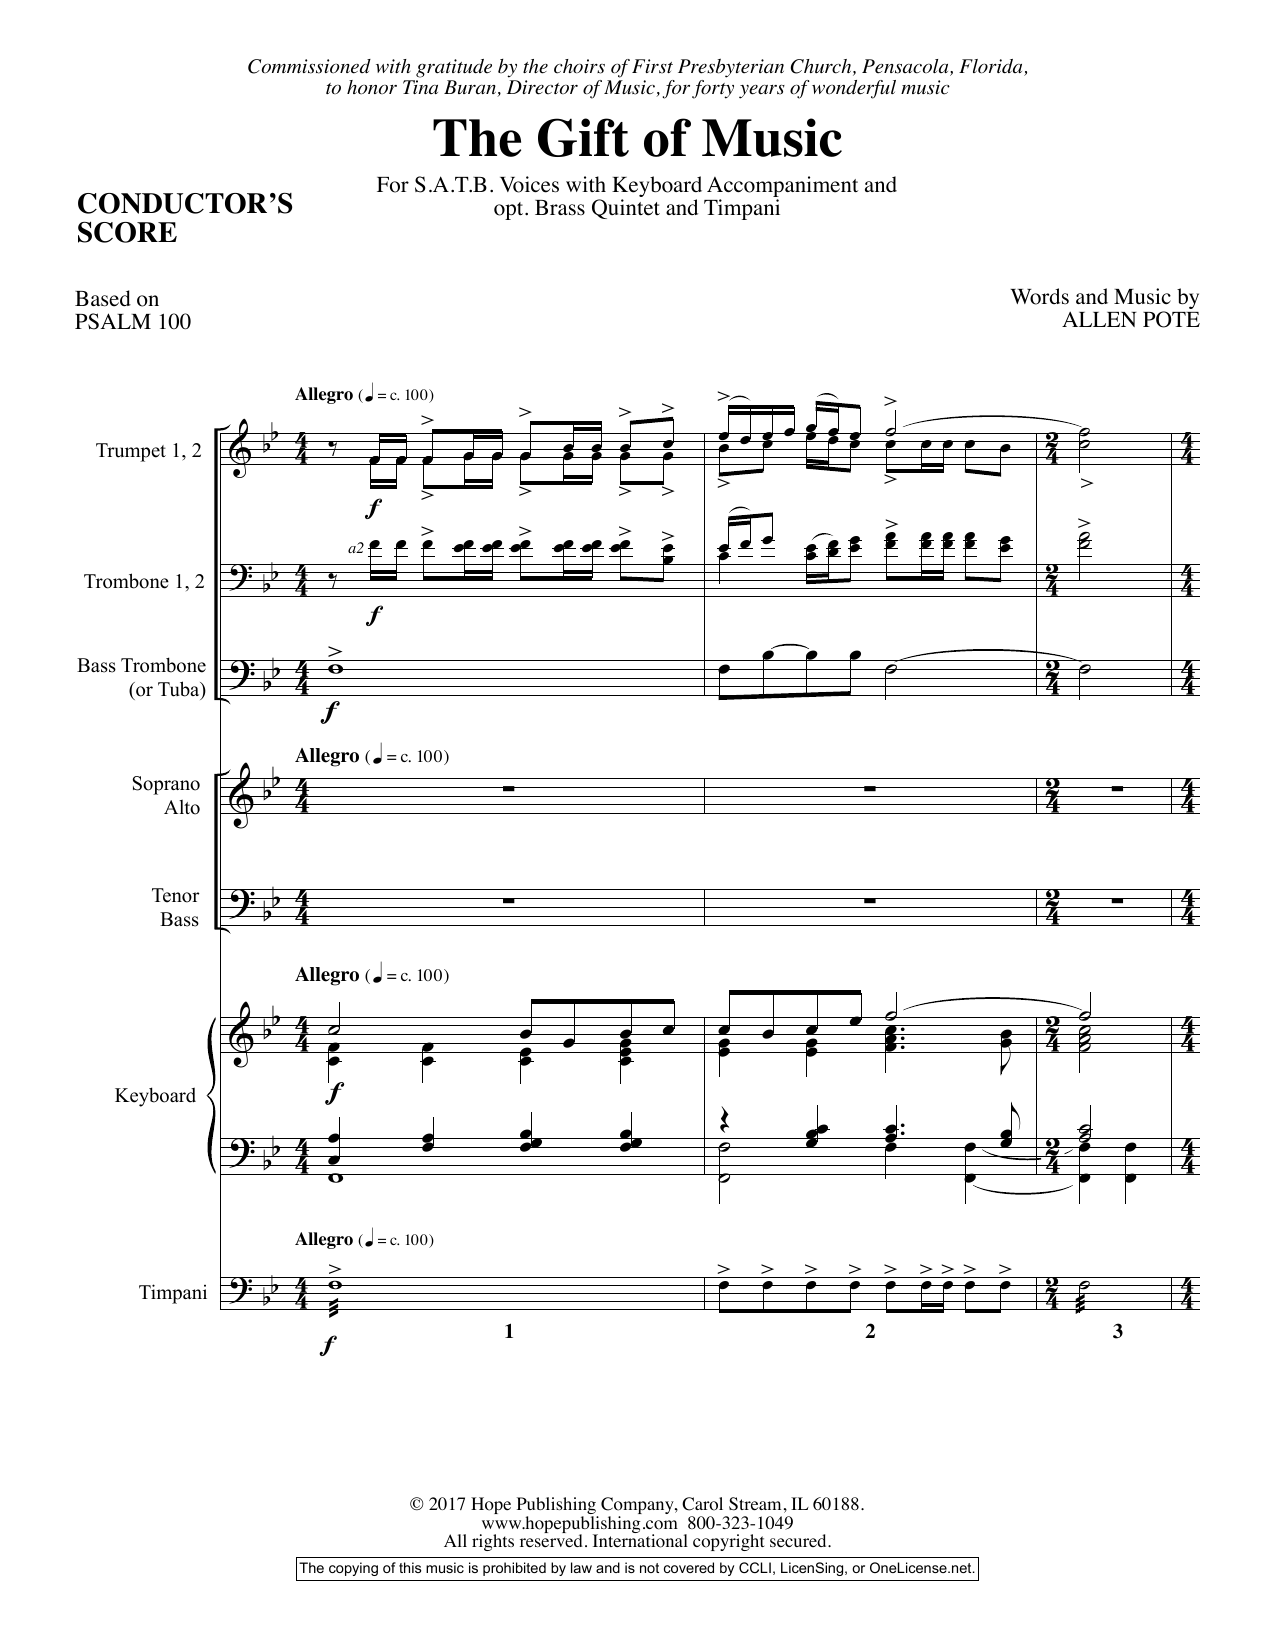 Download Allen Pote The Gift Of Music - Full Score Sheet Music